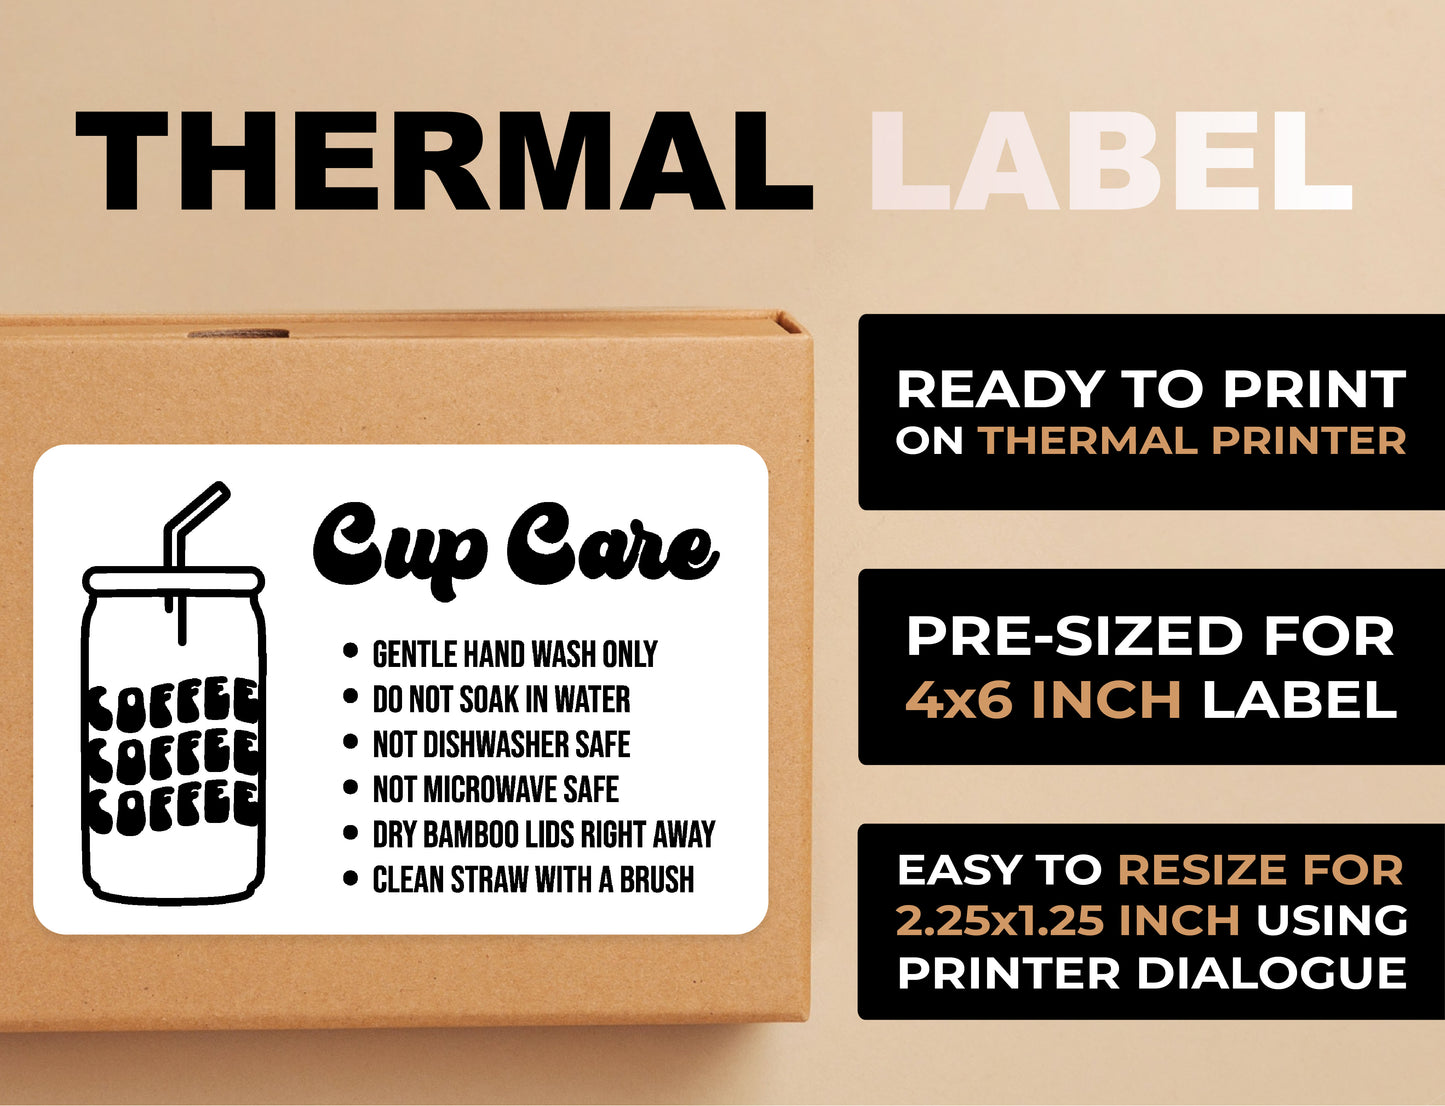 Can Glass Care Thermal Label